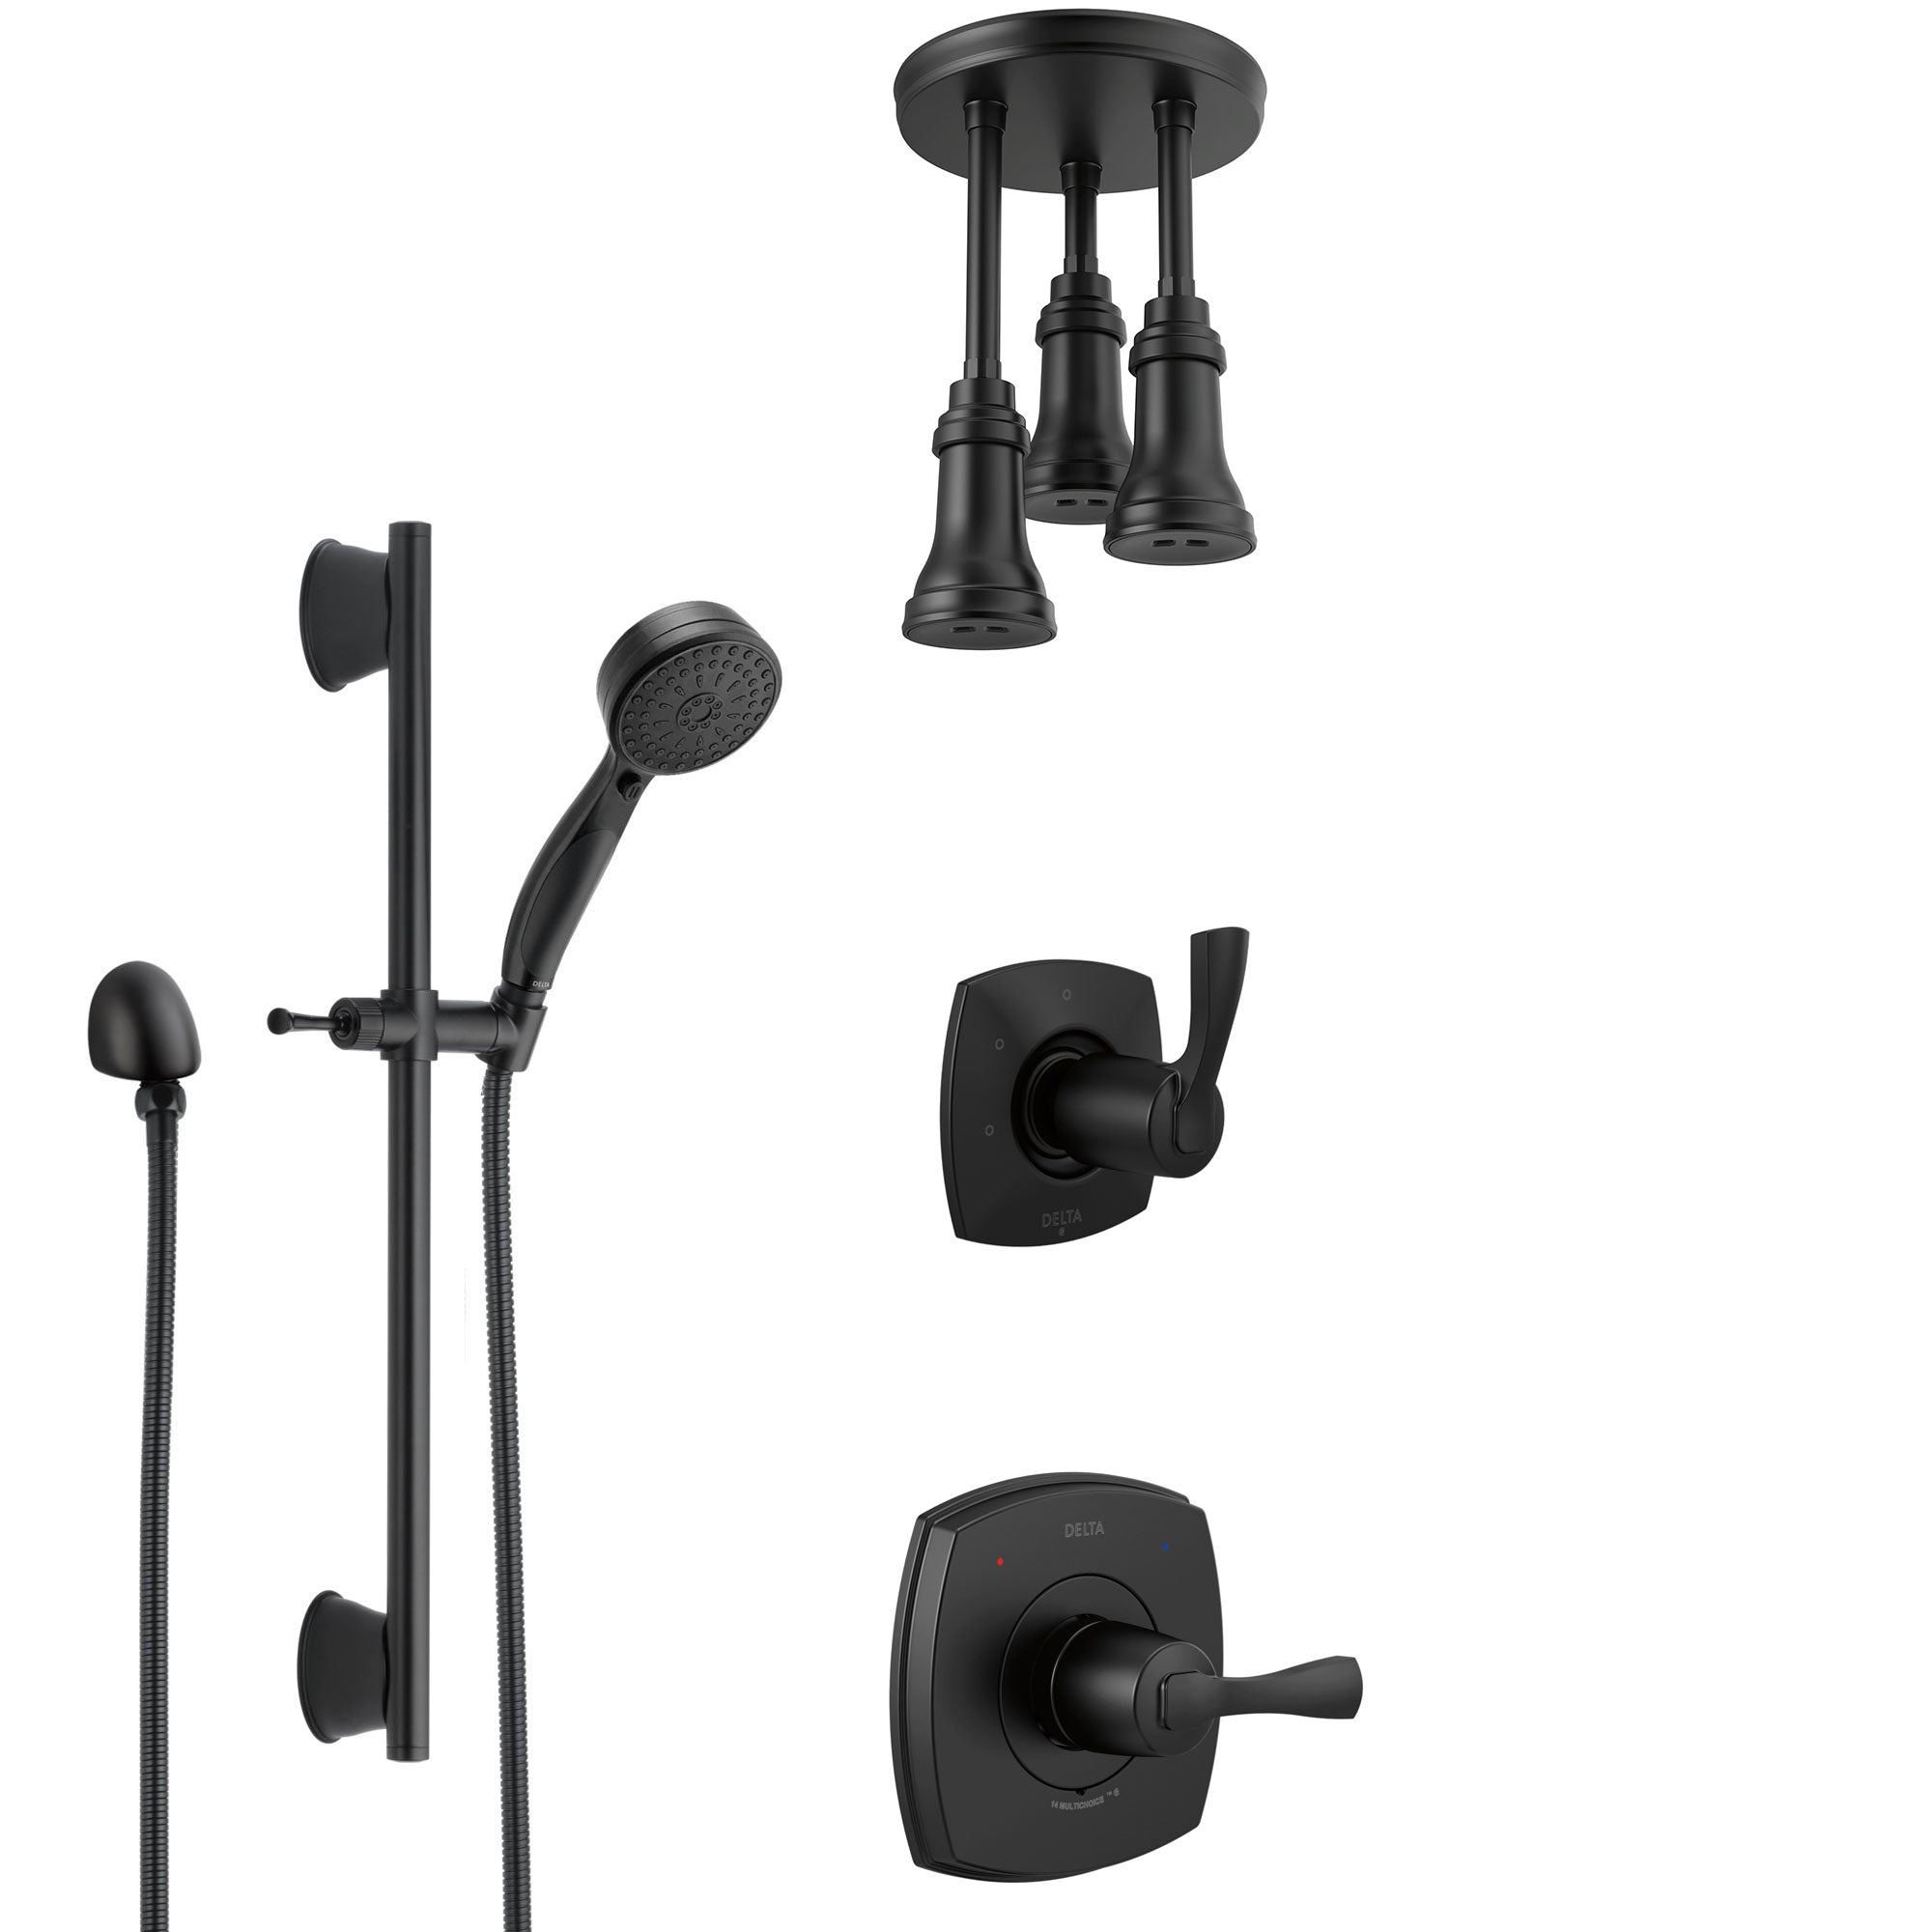 Delta Stryke Matte Black Finish Shower System with Diverter, Triple Pendant Ceiling Mount Showerhead Fixture, and Hand Spray with Slidebar SS14763BL11